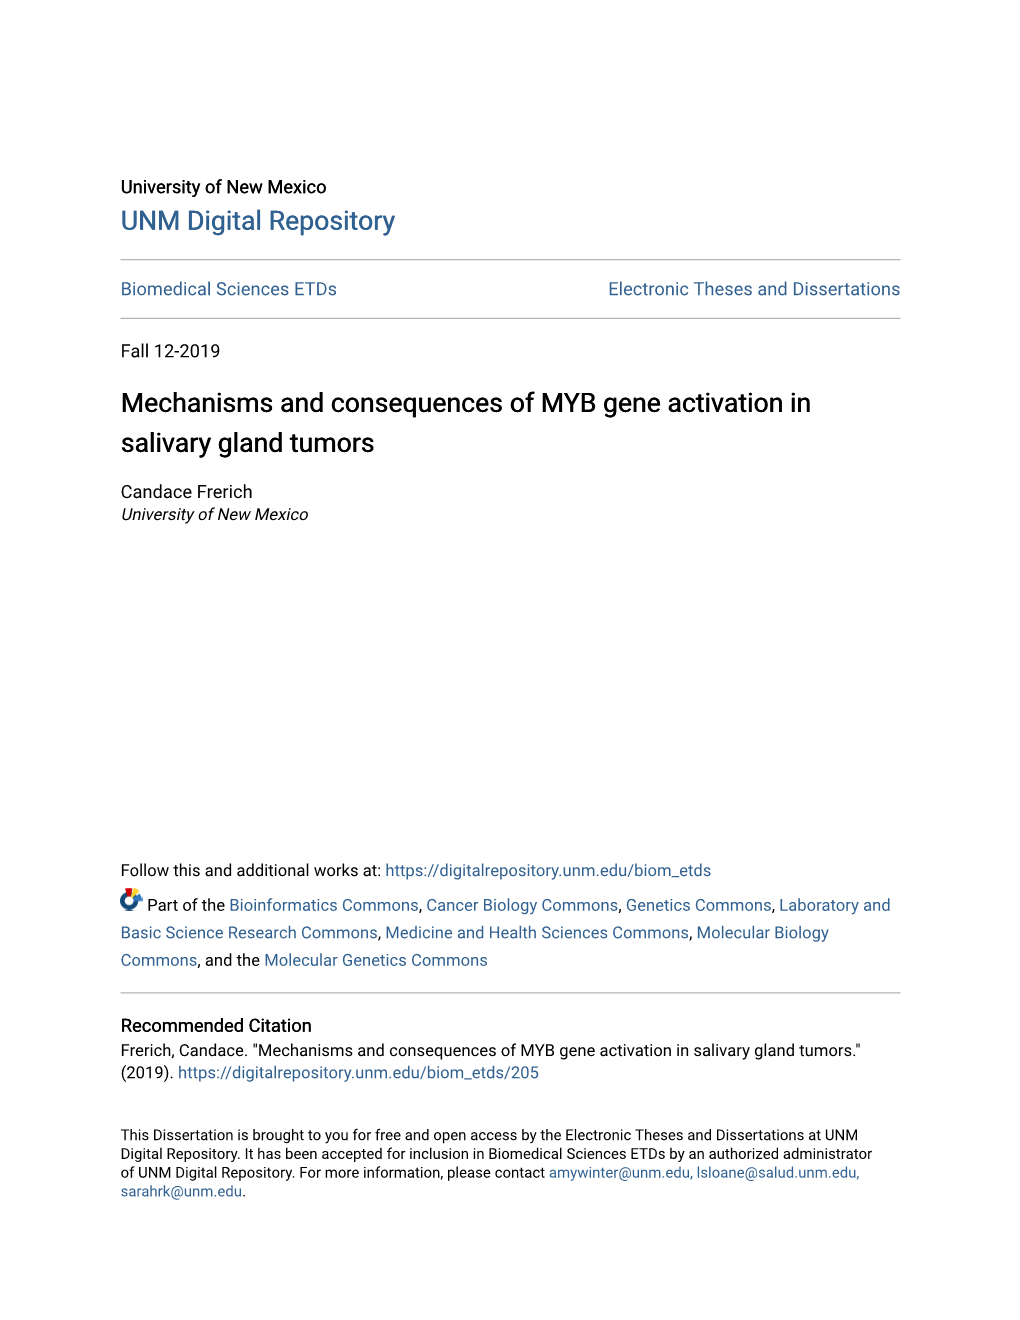 Mechanisms and Consequences of MYB Gene Activation in Salivary Gland Tumors